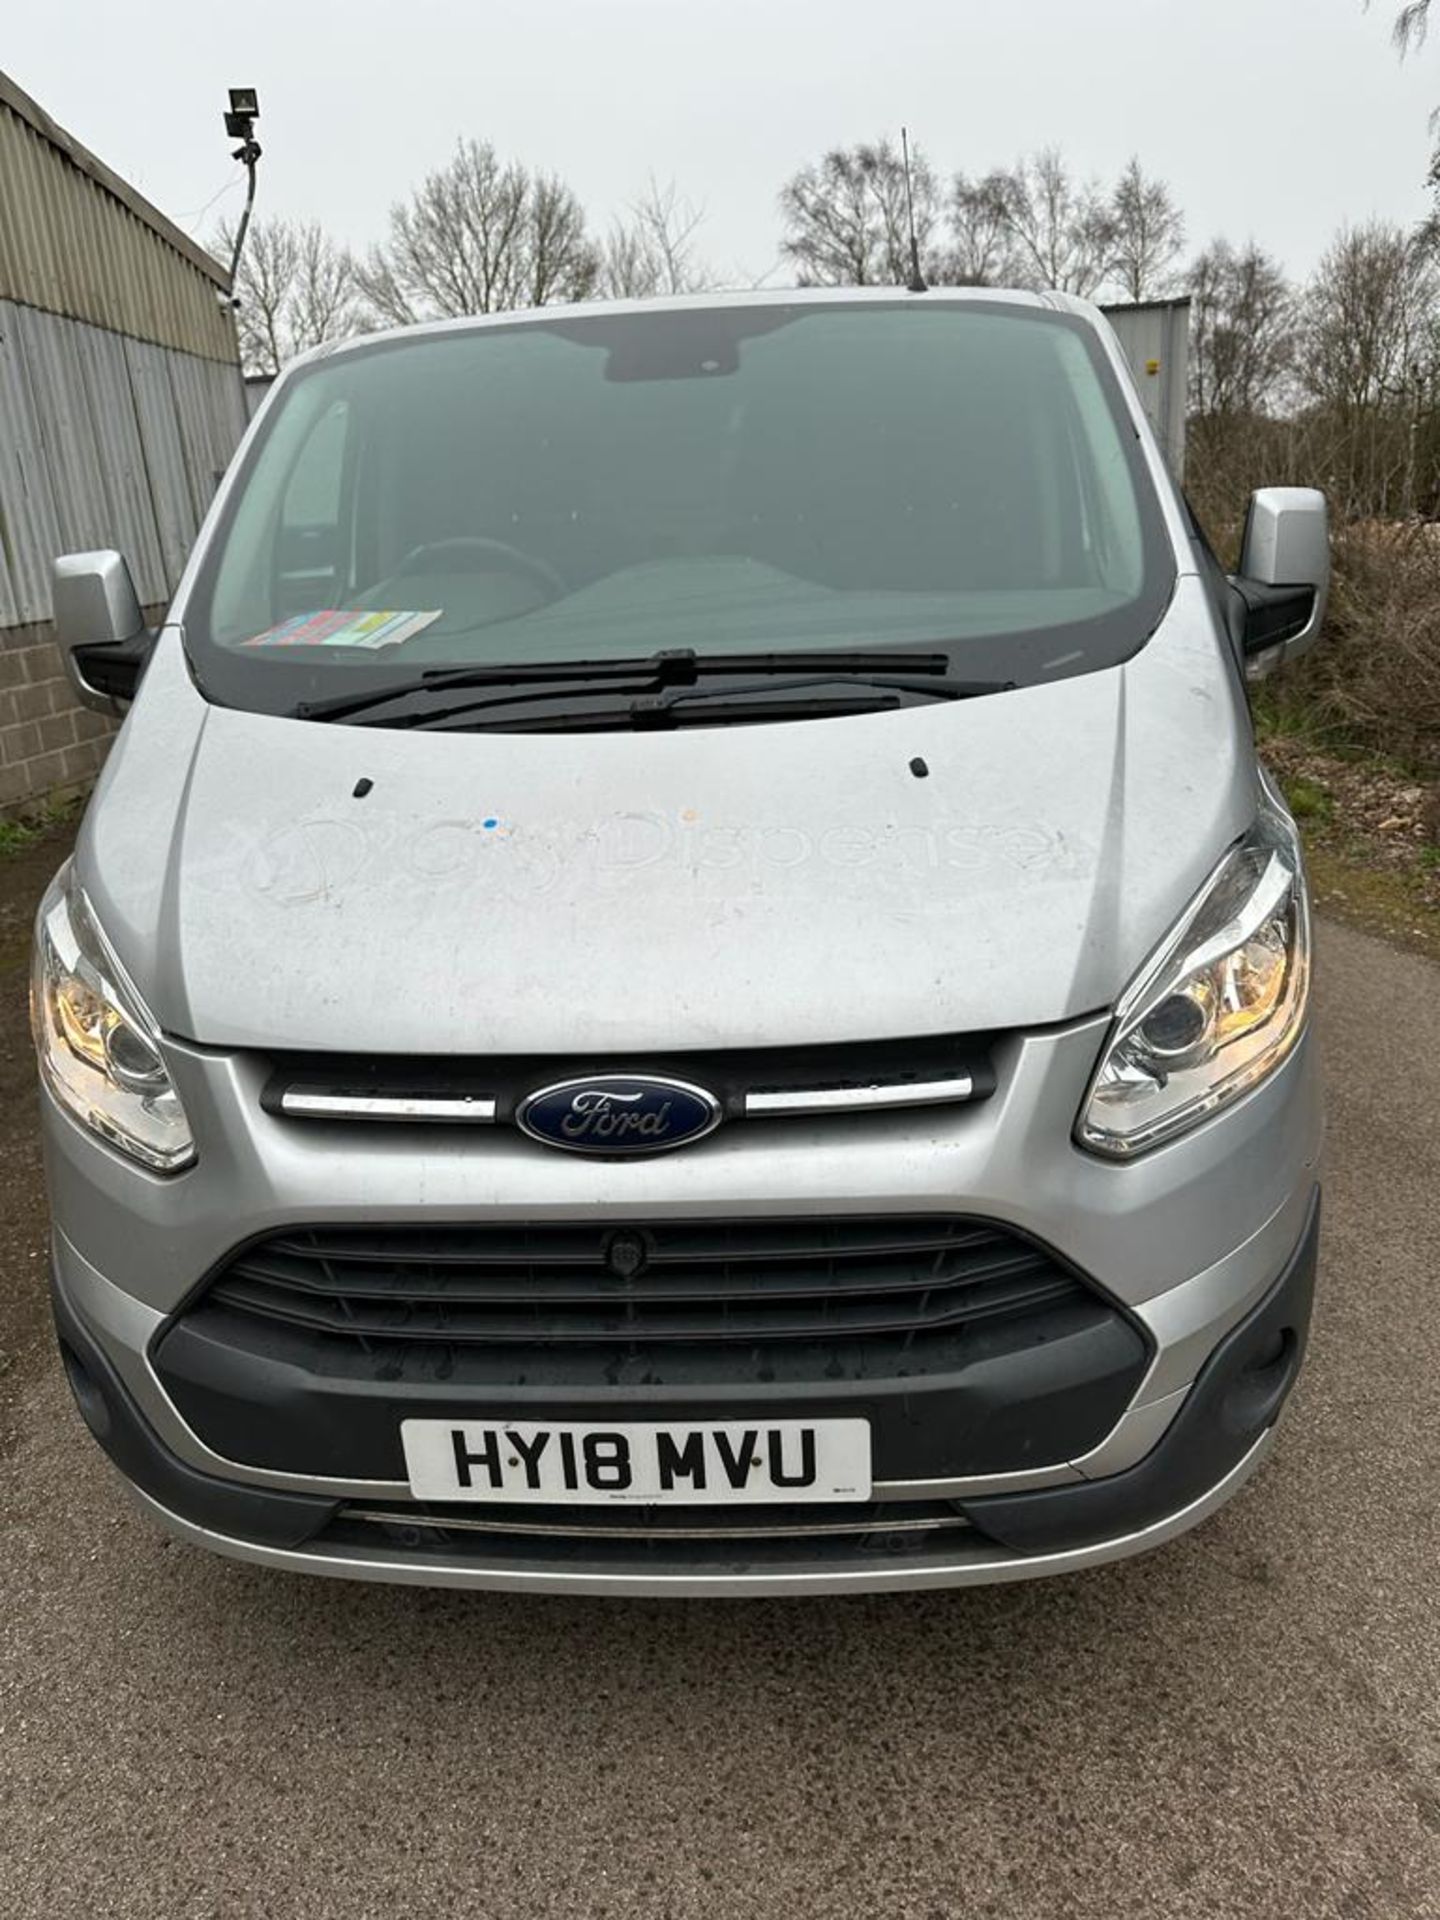 2018 18 FORD TRANSIT CUSTOM PANEL VAN - 148K MILES - LIMITED - EURO 6 - ALLOY WHEELS - AIR CON - Image 2 of 8